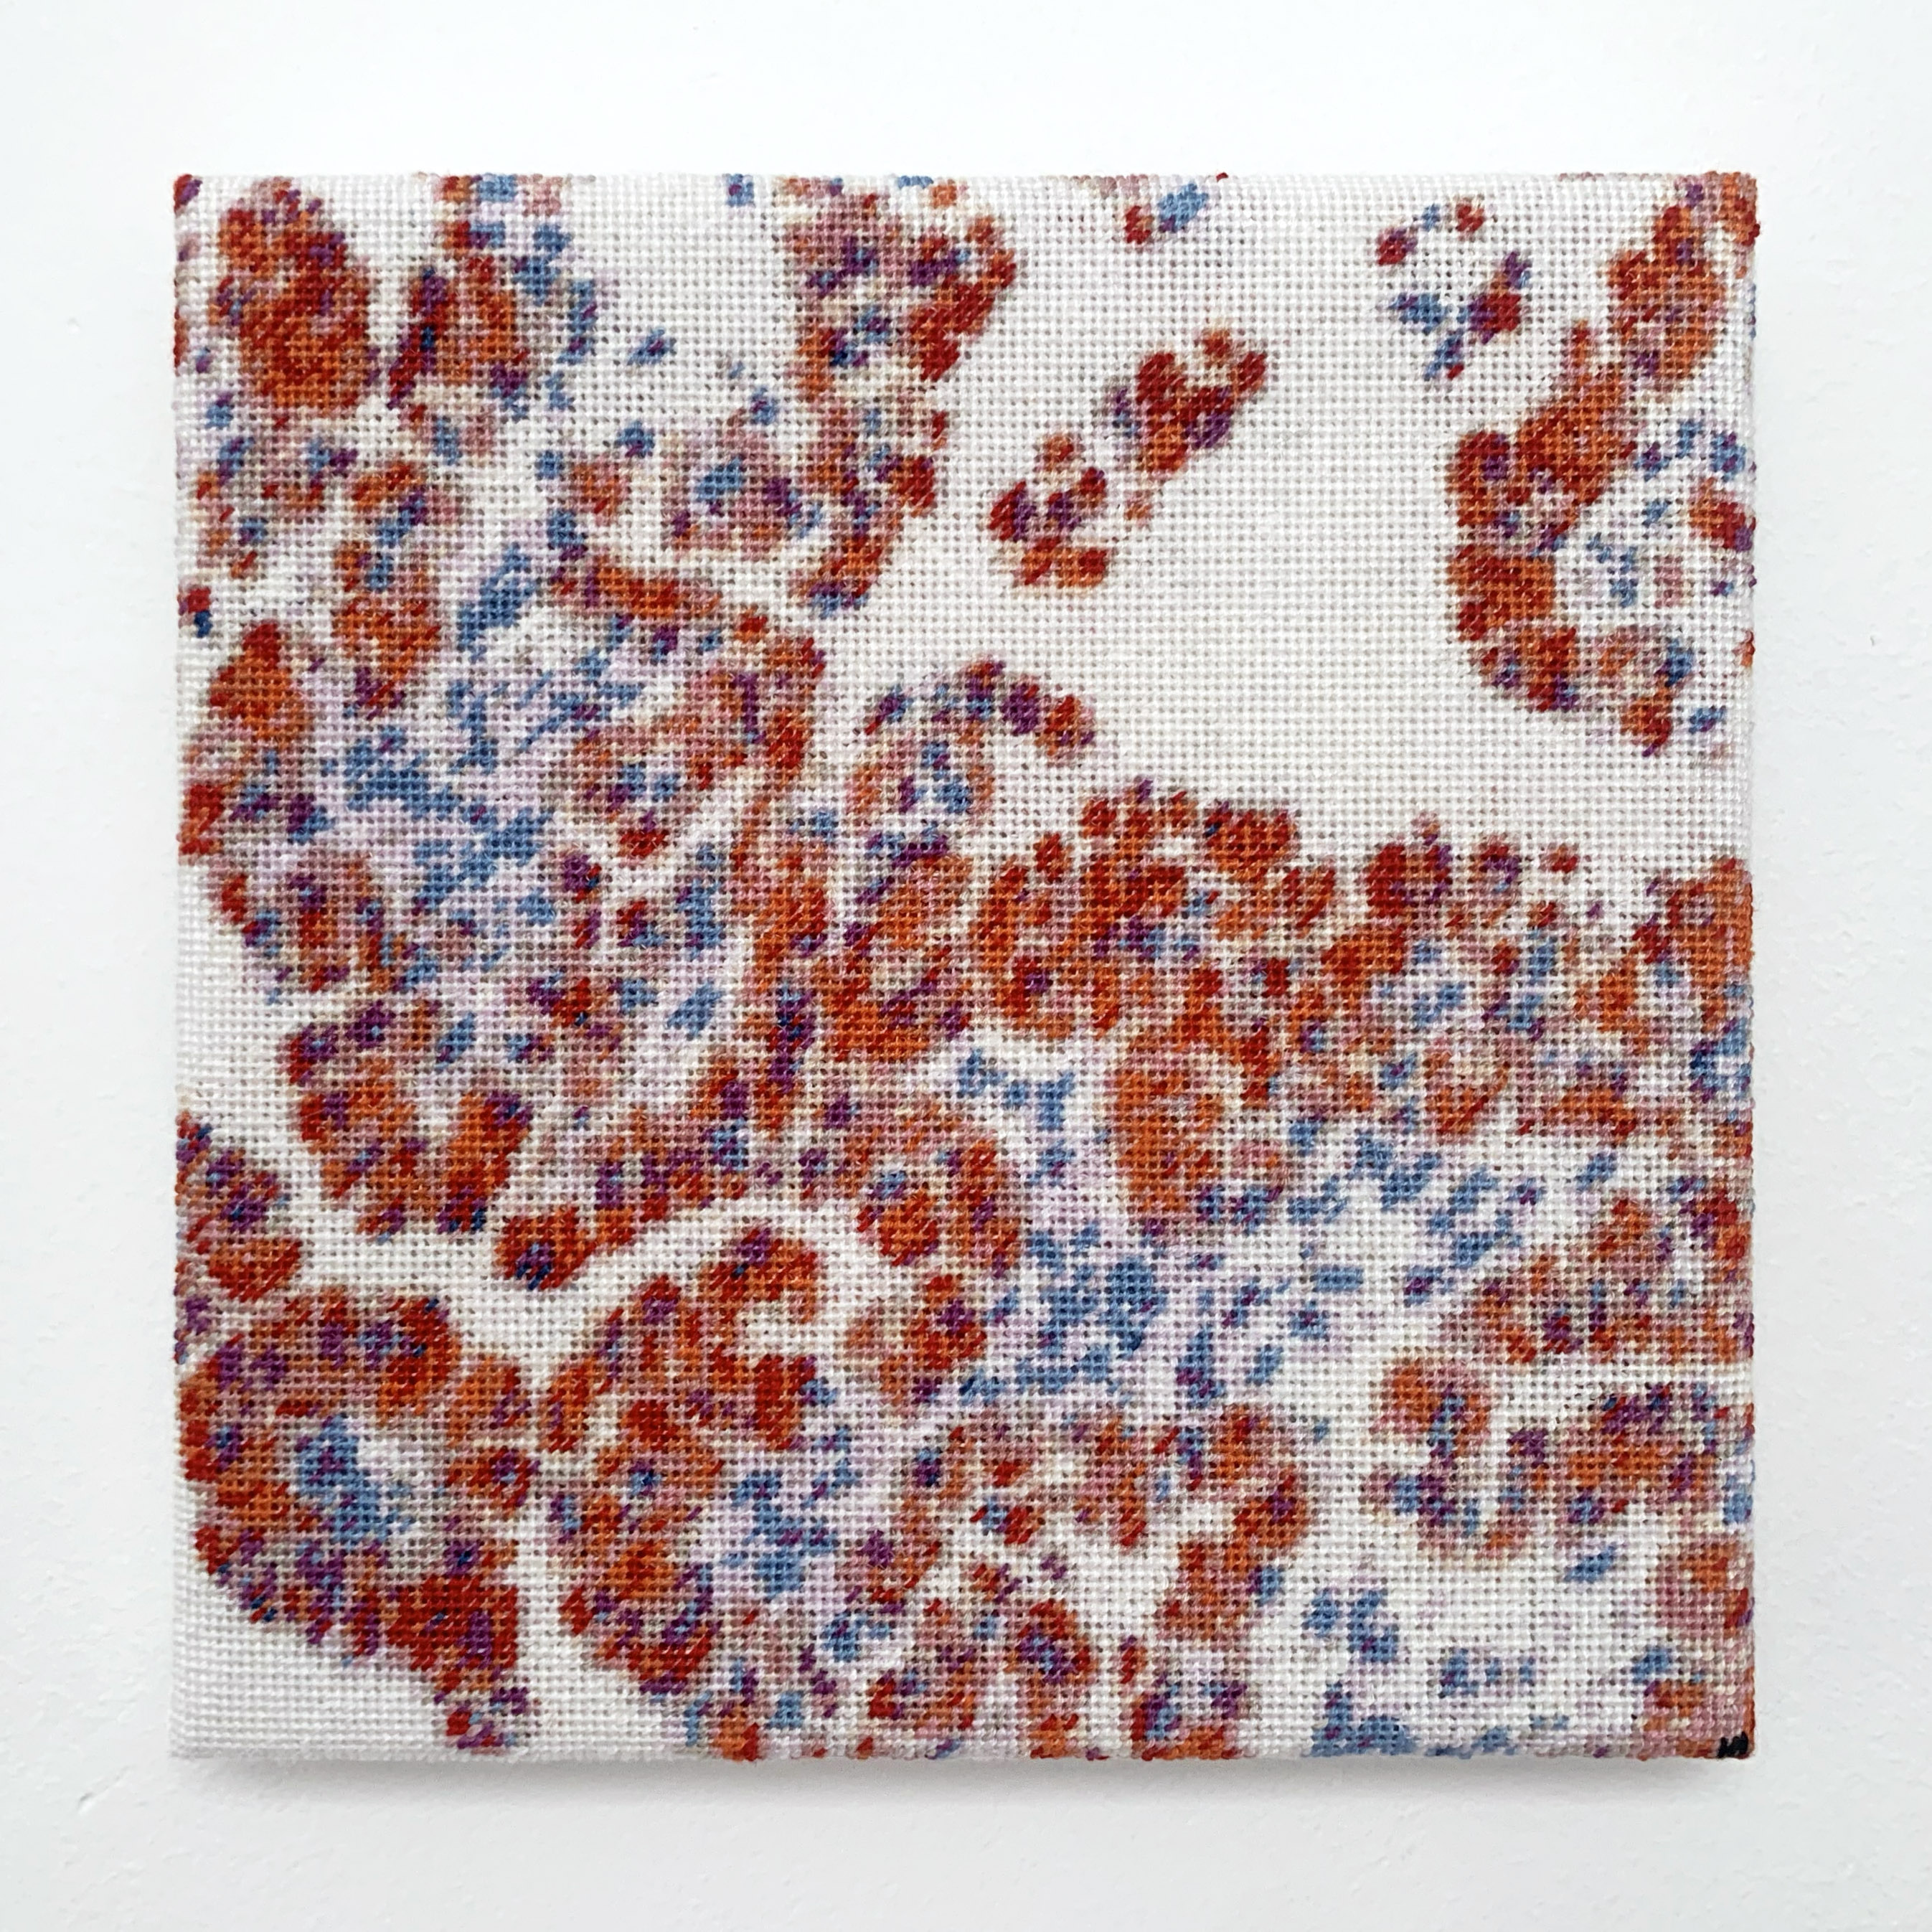  / Embroidered representation of an Immunohistochemical staining for mitochondrial protein MU213-UC showing abundant cytoplasmic mitochondria, consistent with an oncocytoma of the lacrimal gland. Art by artist Marine Beaufils.